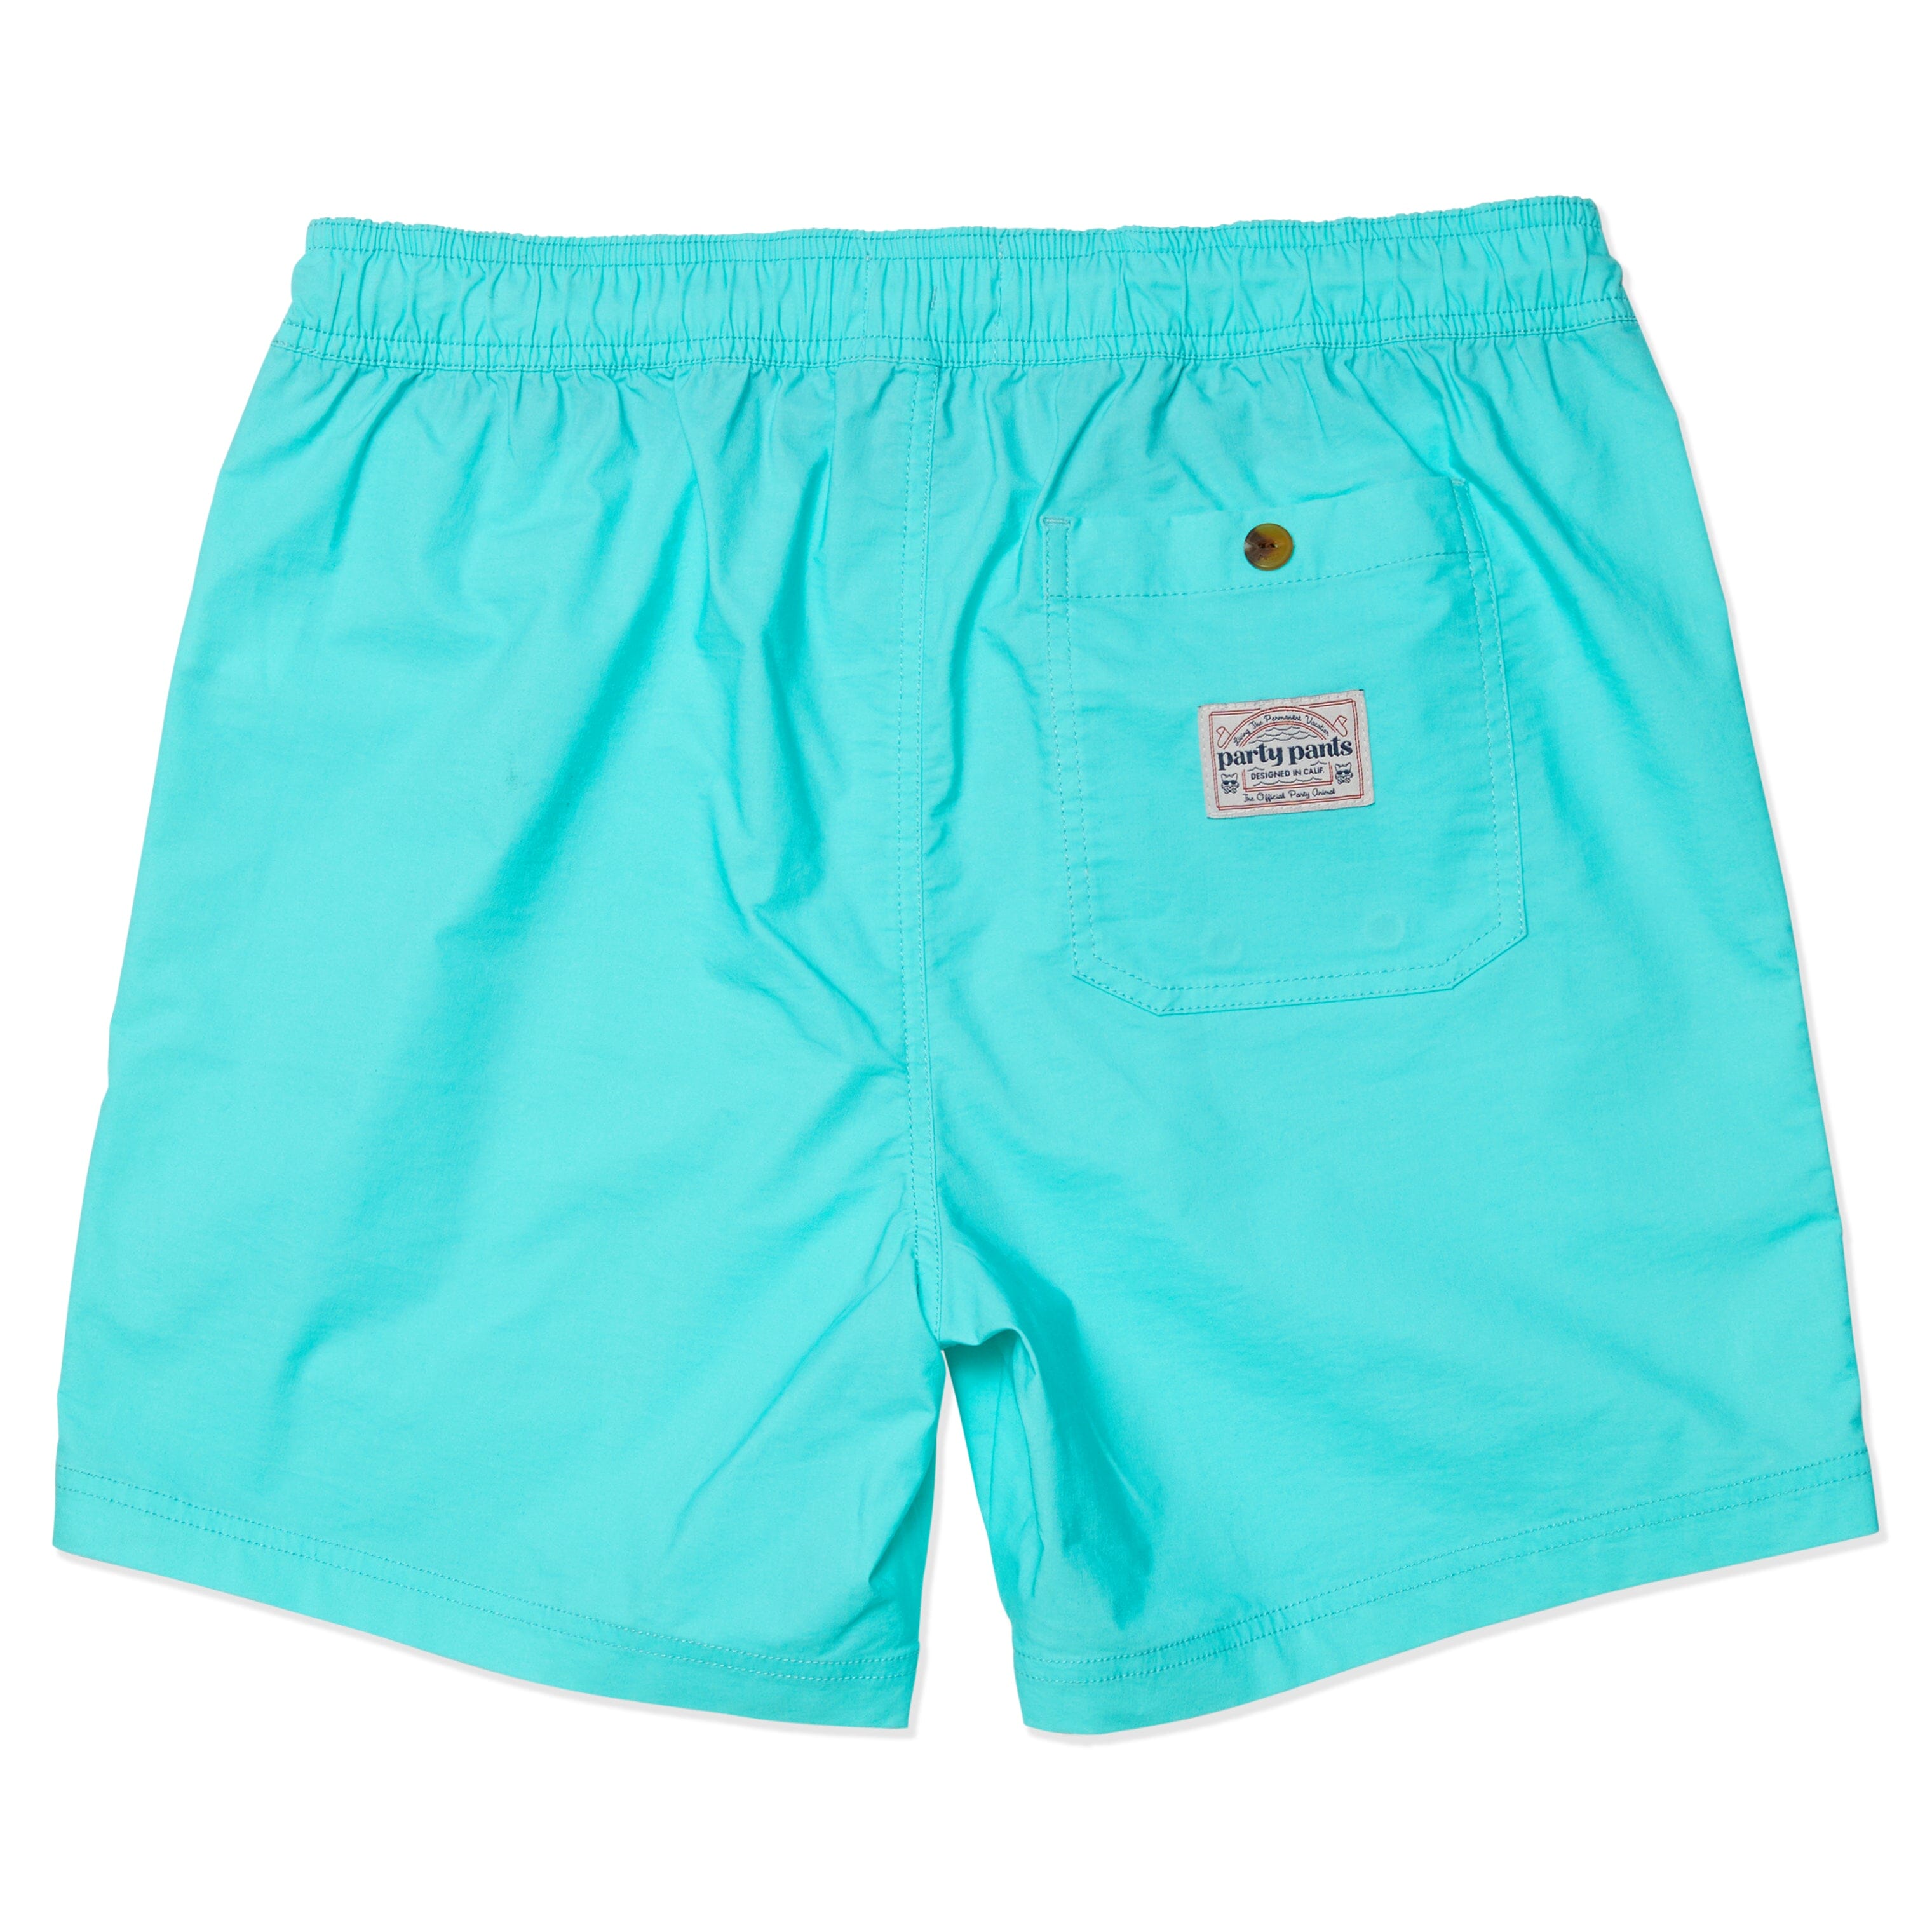 SOLID PARTY STARTER - BLUE VINTAGE SOLID SHORTS PARTY PANTS 